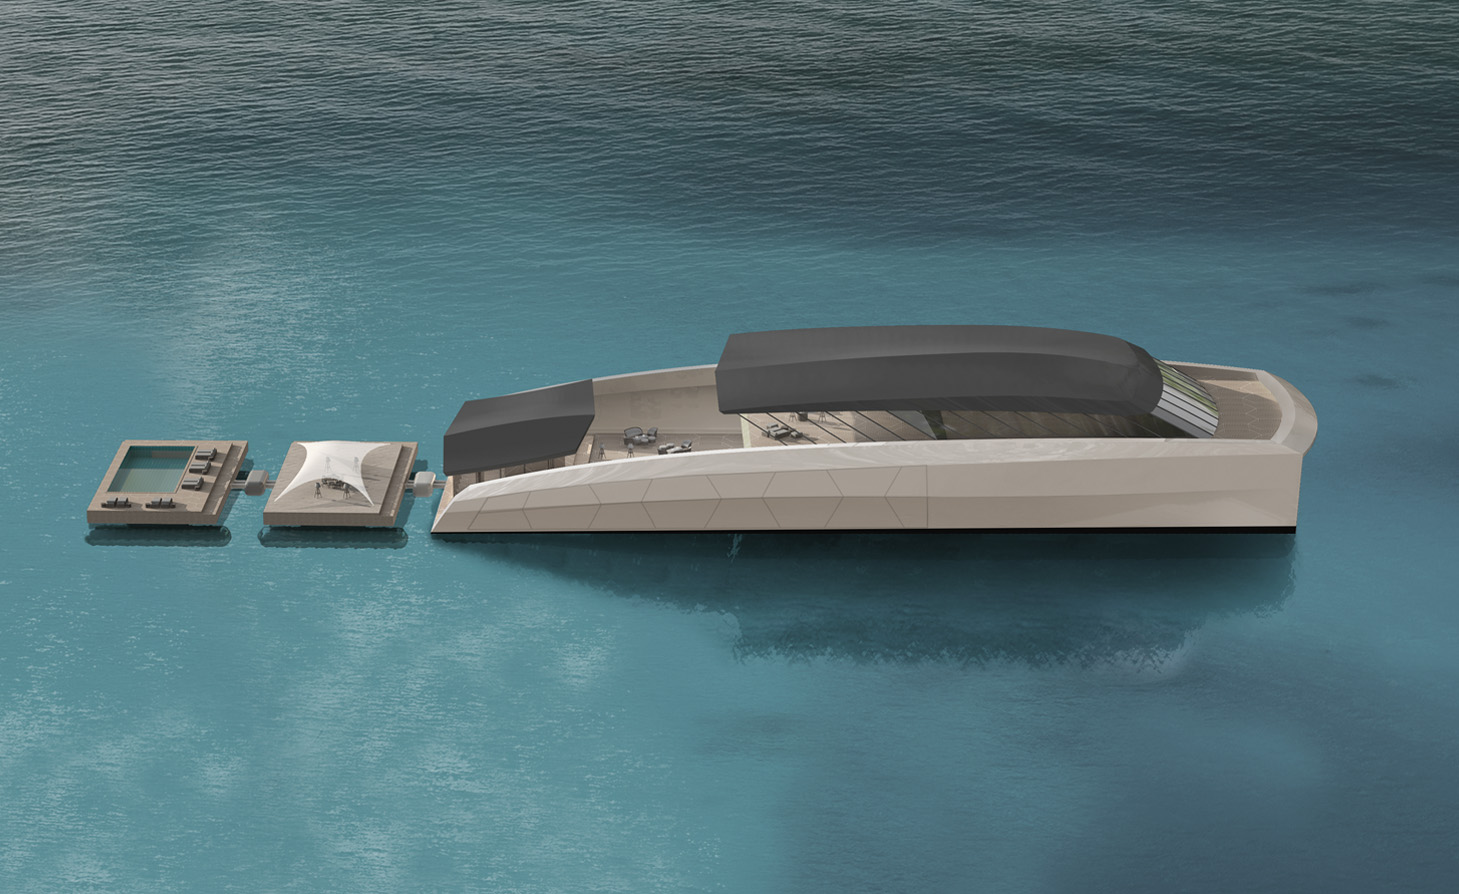 5 upcoming futuristic yachts that billionaires across the